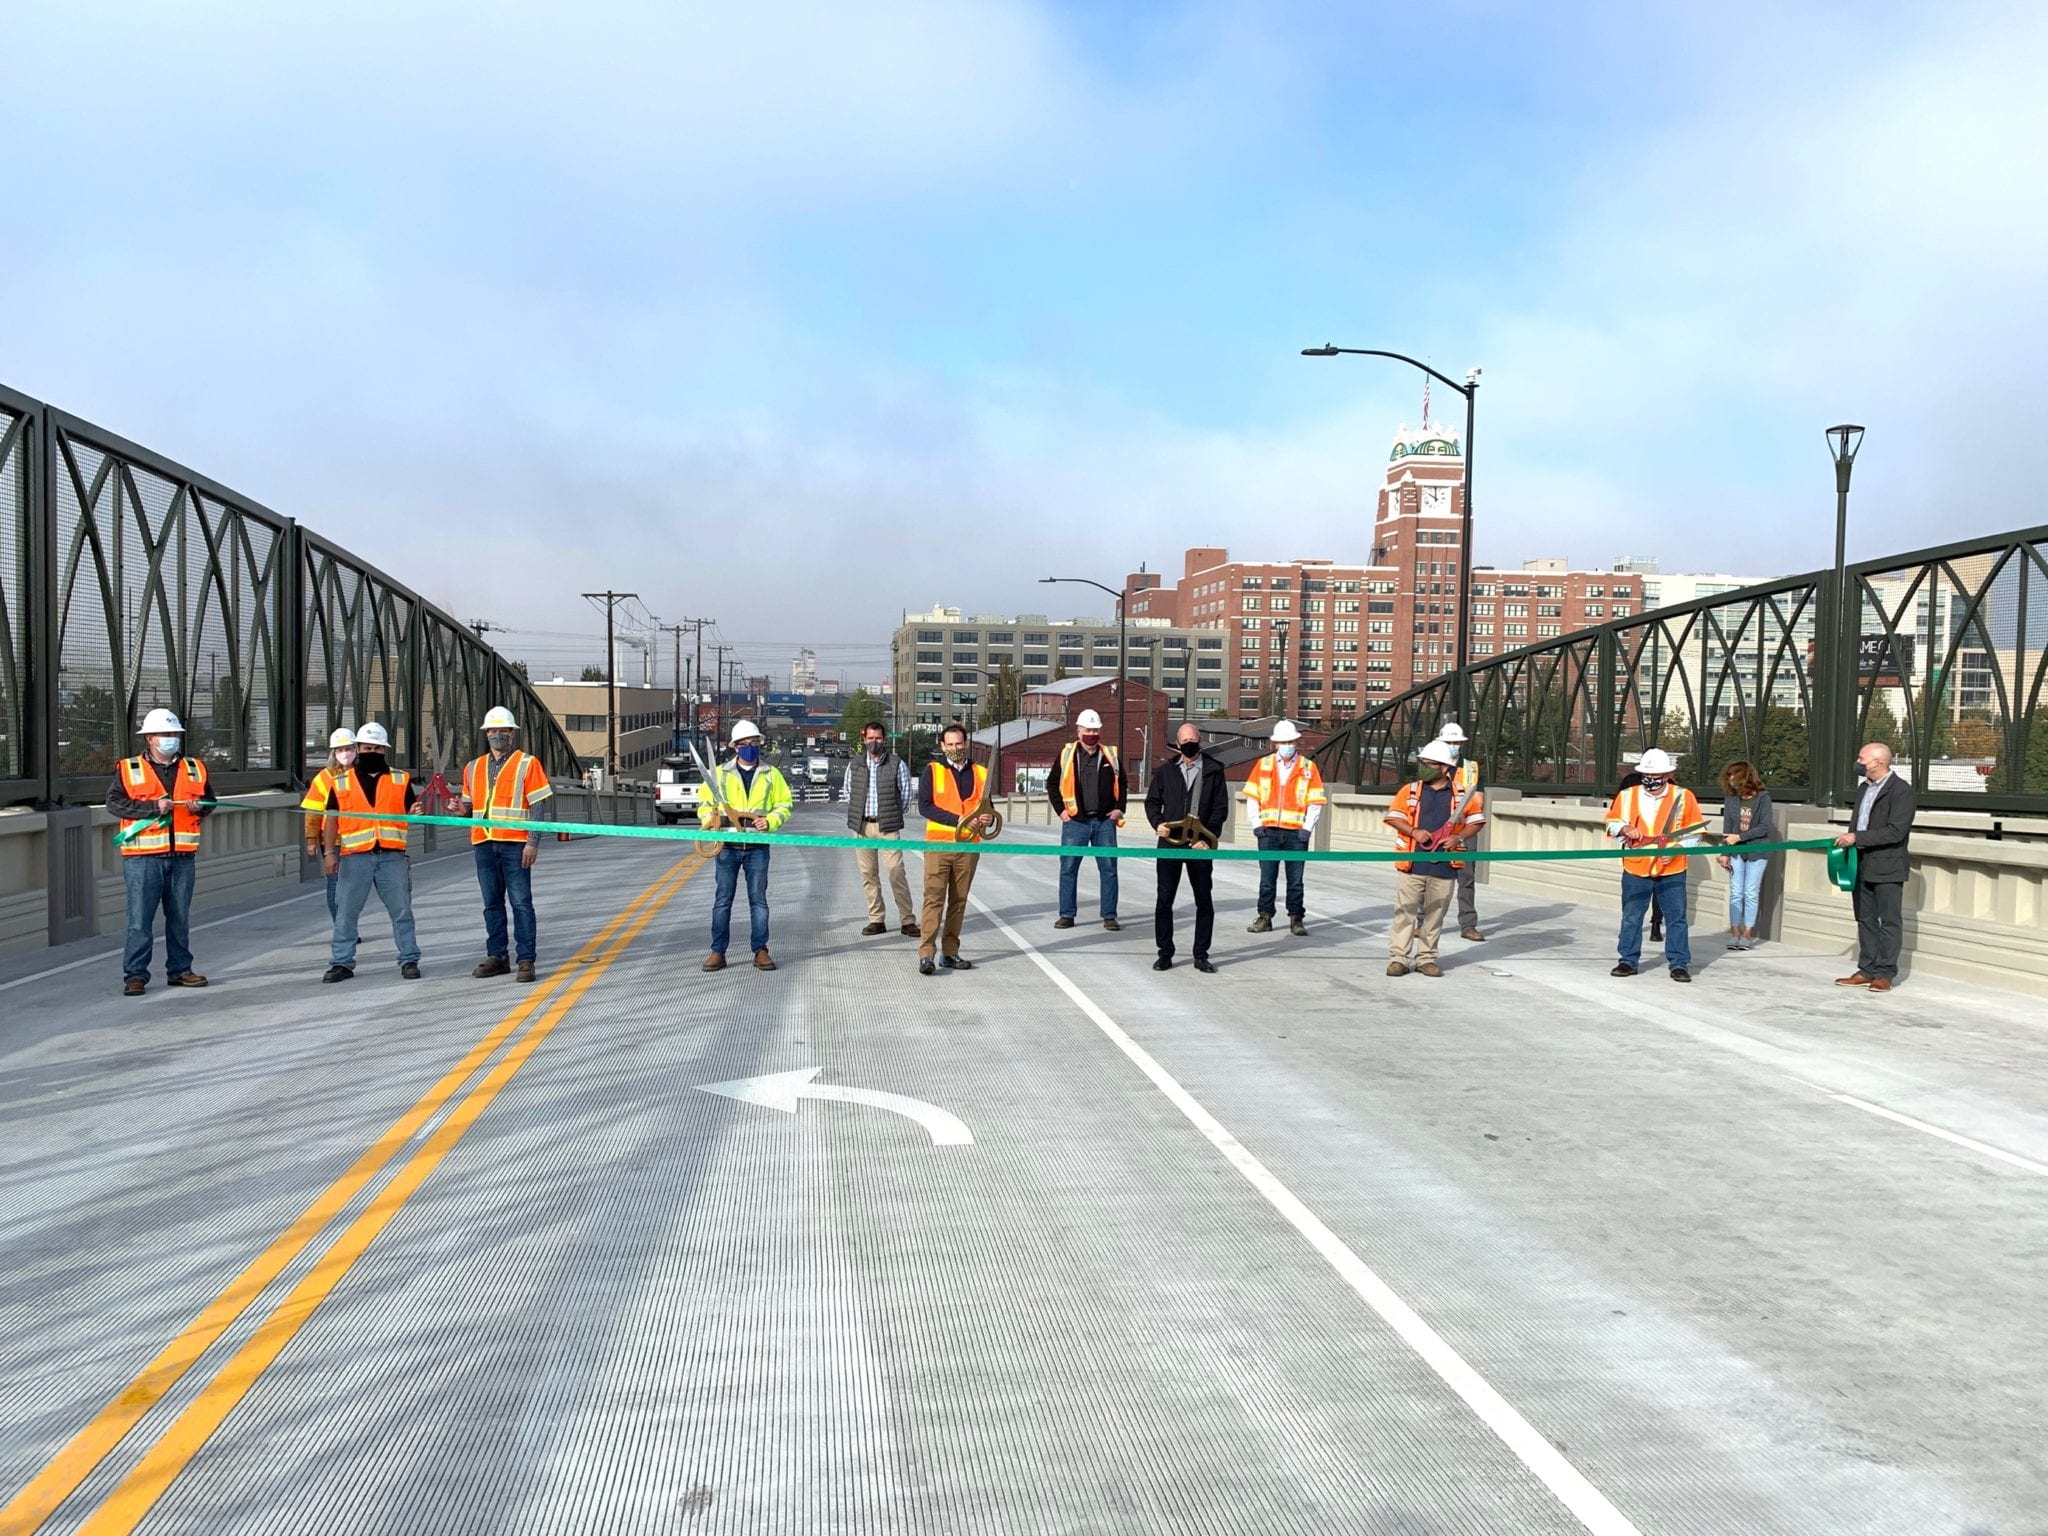 Group of people in construction vests and hard hats holding a green ribbon across the Lander St Bridge. One person holds large scissors and is preparing to cut the ribbon.